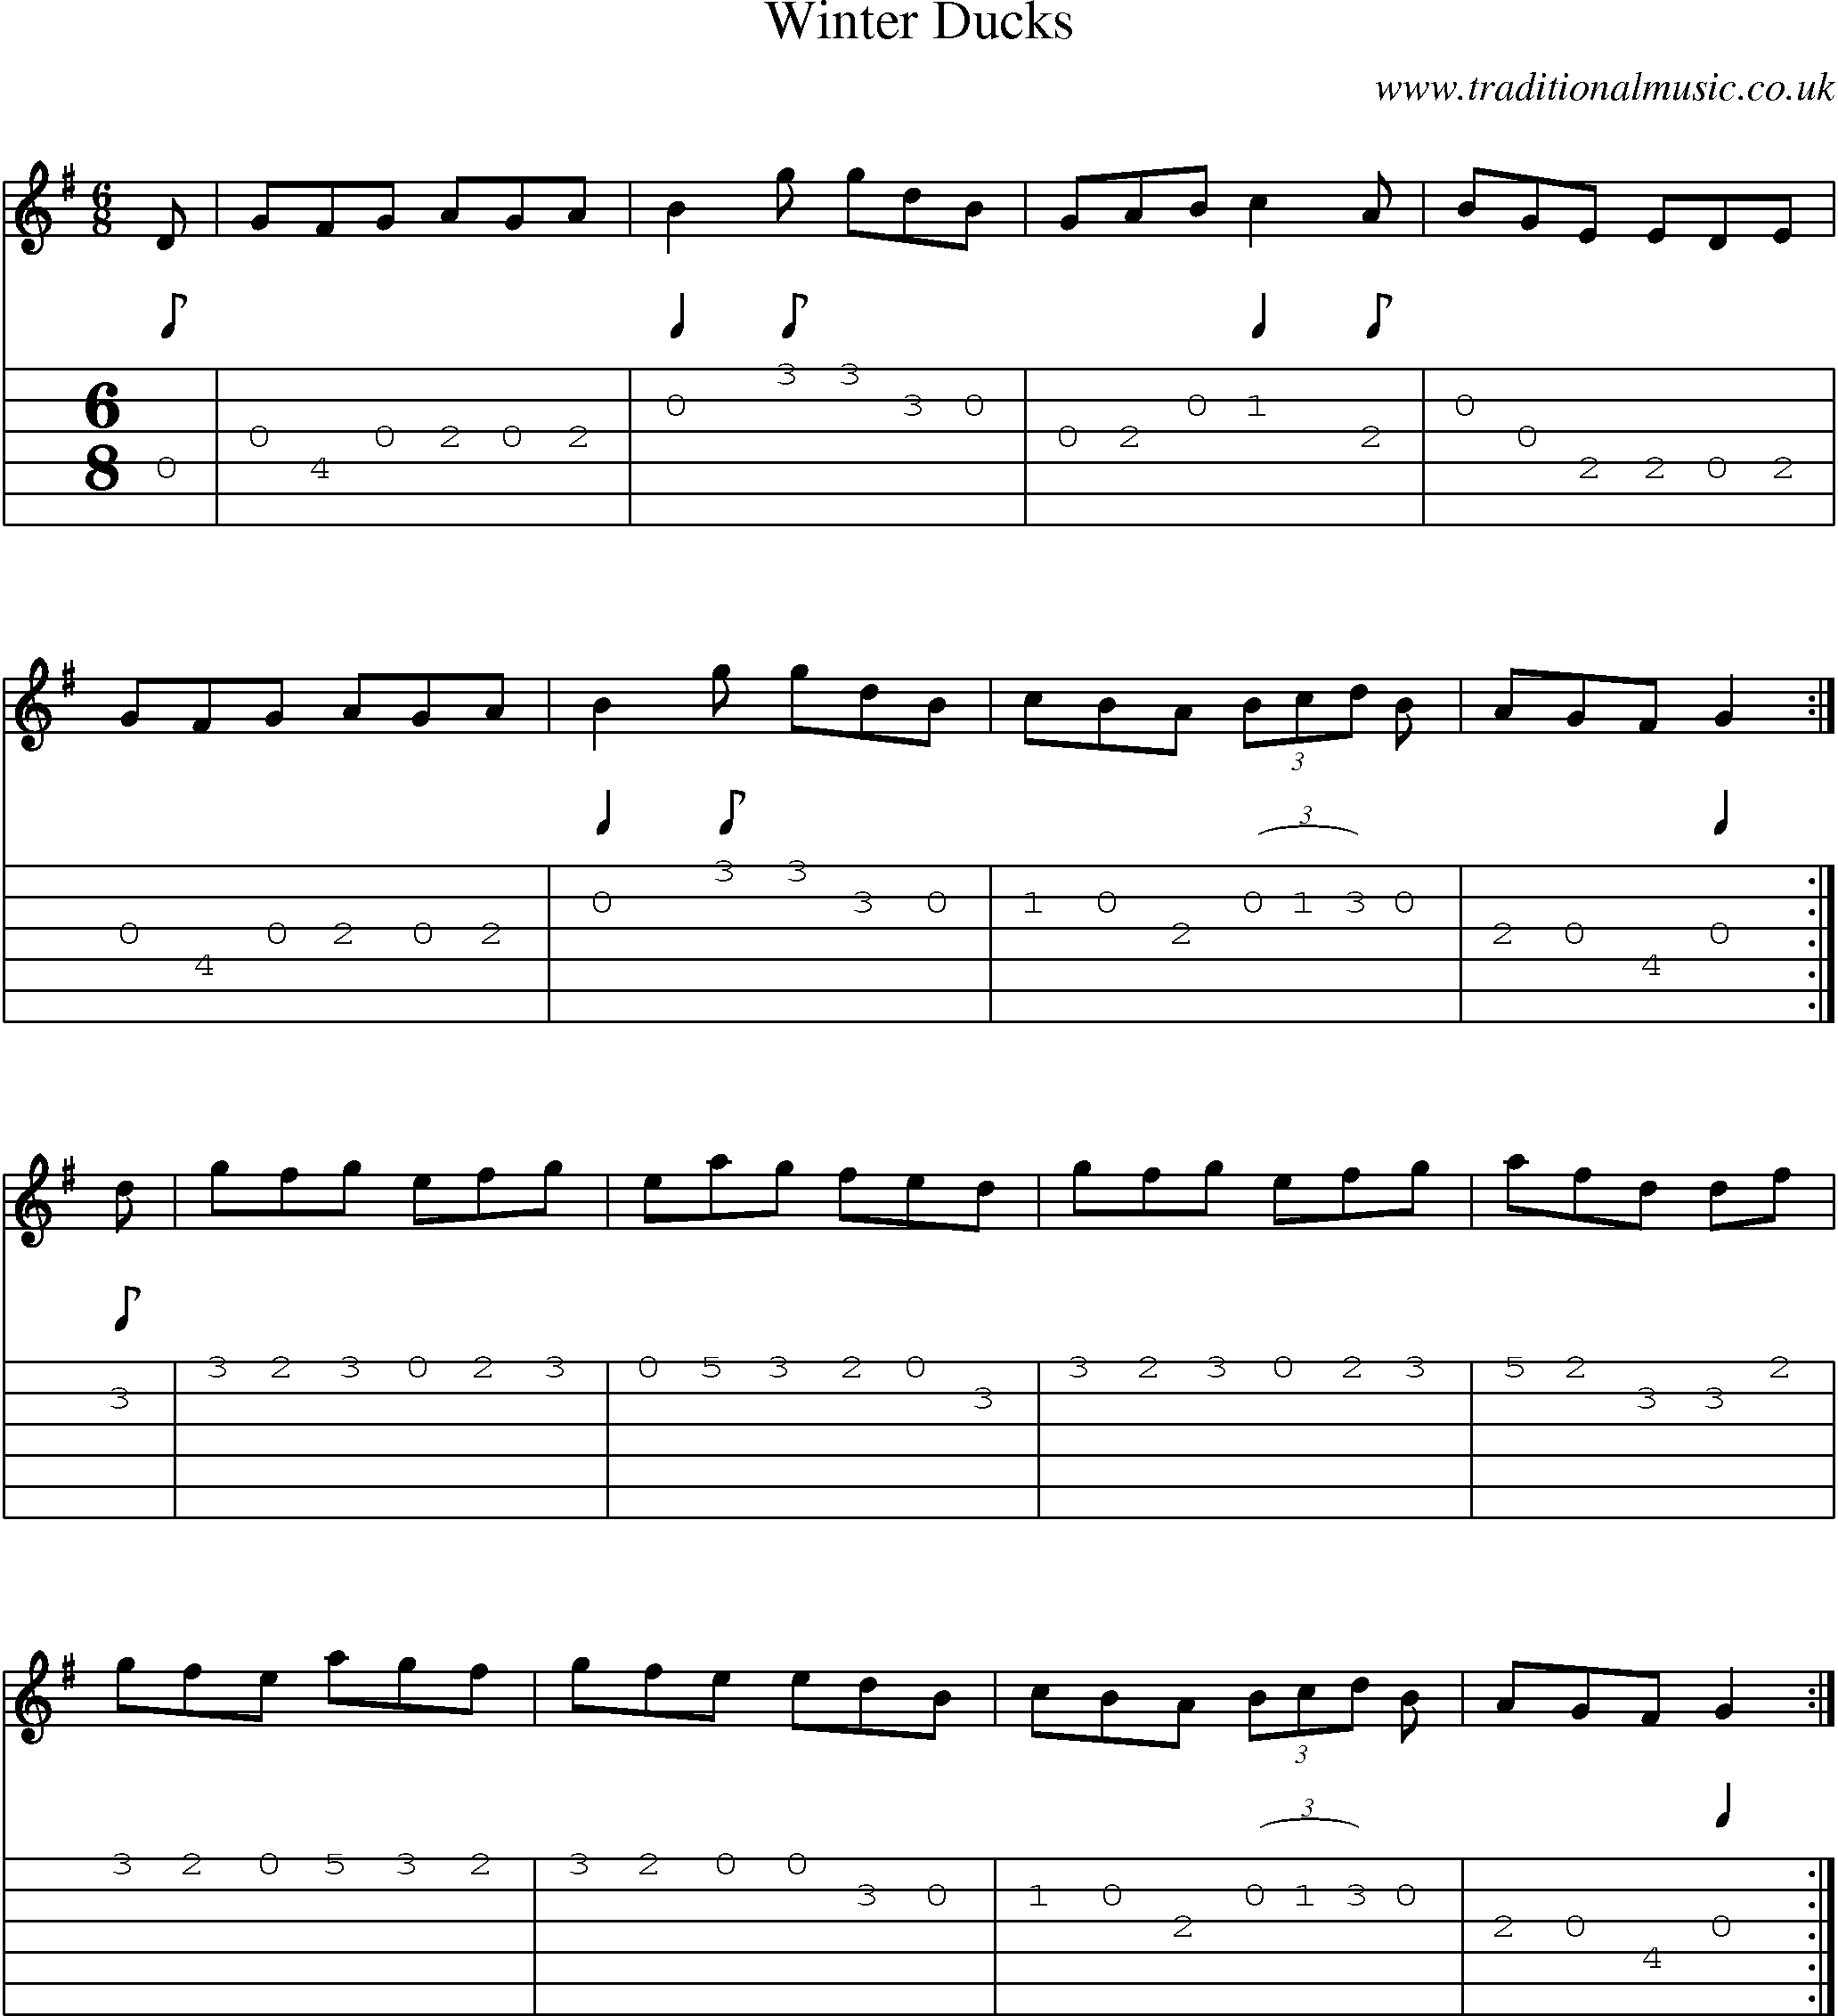 Music Score and Guitar Tabs for Winter Ducks